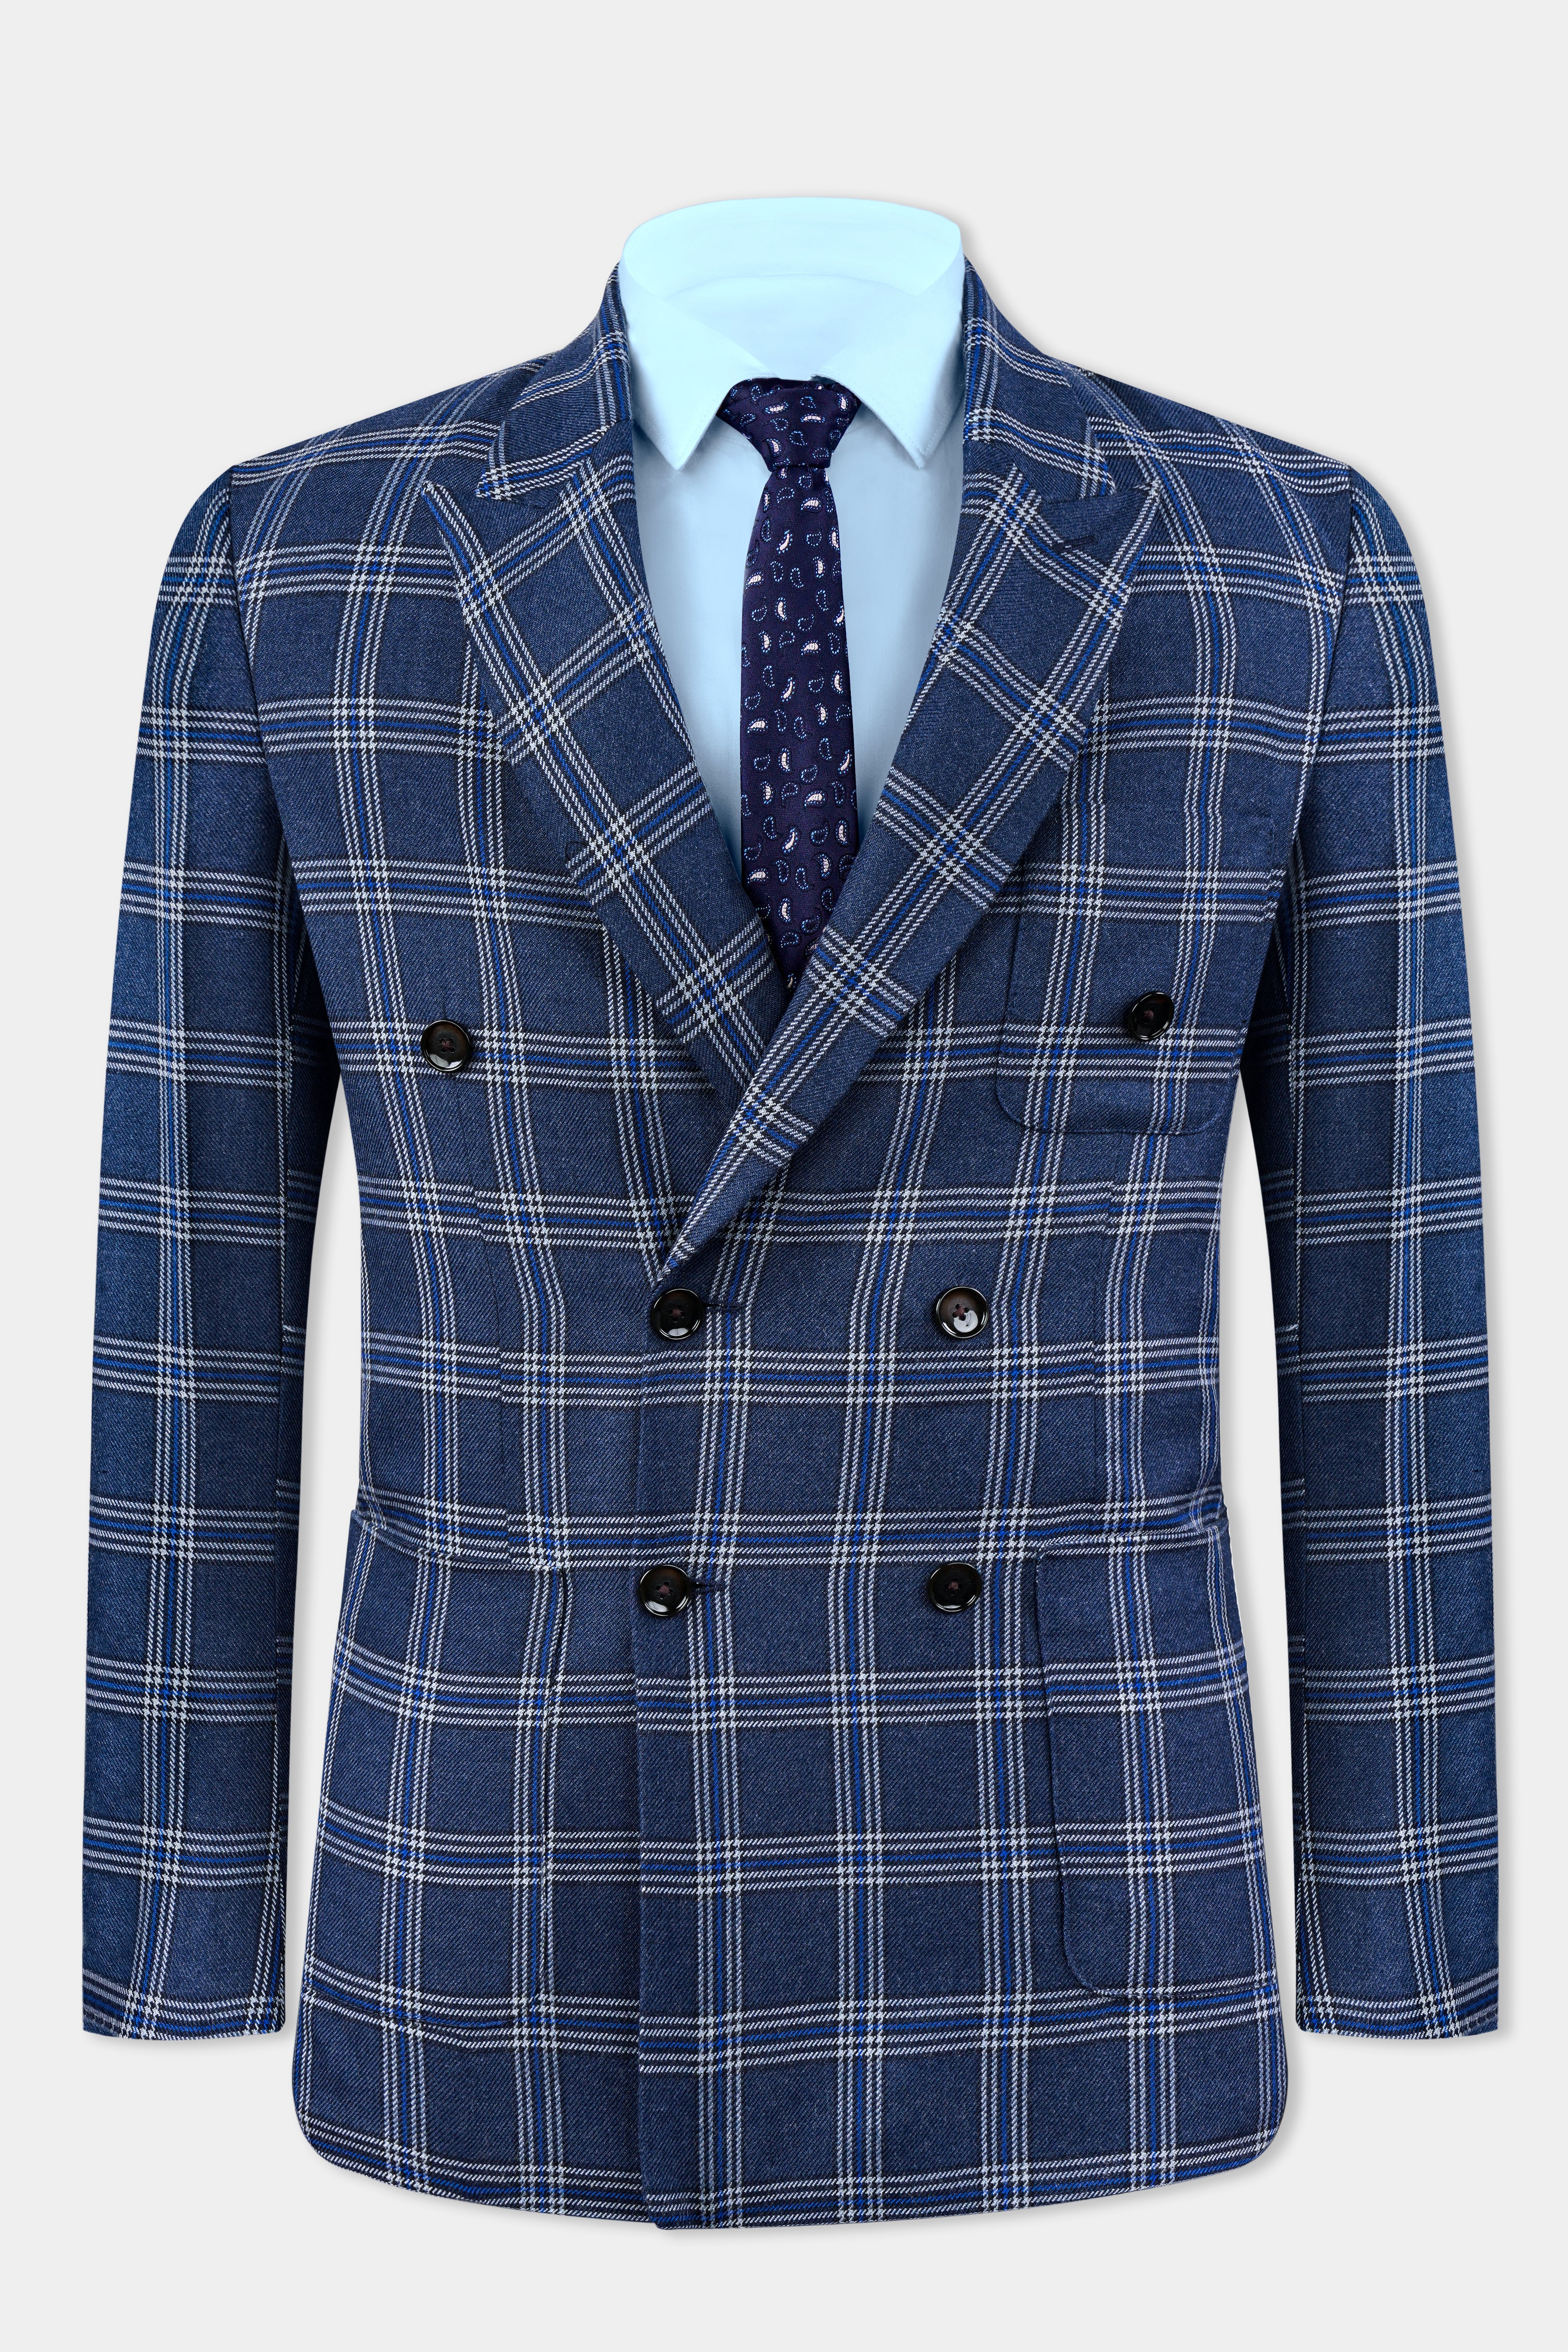 Cloud Blue and White Plaid Tweed Double Breasted Suit ST3130-DB-PP-36, ST3130-DB-PP-38, ST3130-DB-PP-40, ST3130-DB-PP-42, ST3130-DB-PP-44, ST3130-DB-PP-46, ST3130-DB-PP-48, ST3130-DB-PP-50, ST3130-DB-PP-52, ST3130-DB-PP-54, ST3130-DB-PP-56, ST3130-DB-PP-58, ST3130-DB-PP-60